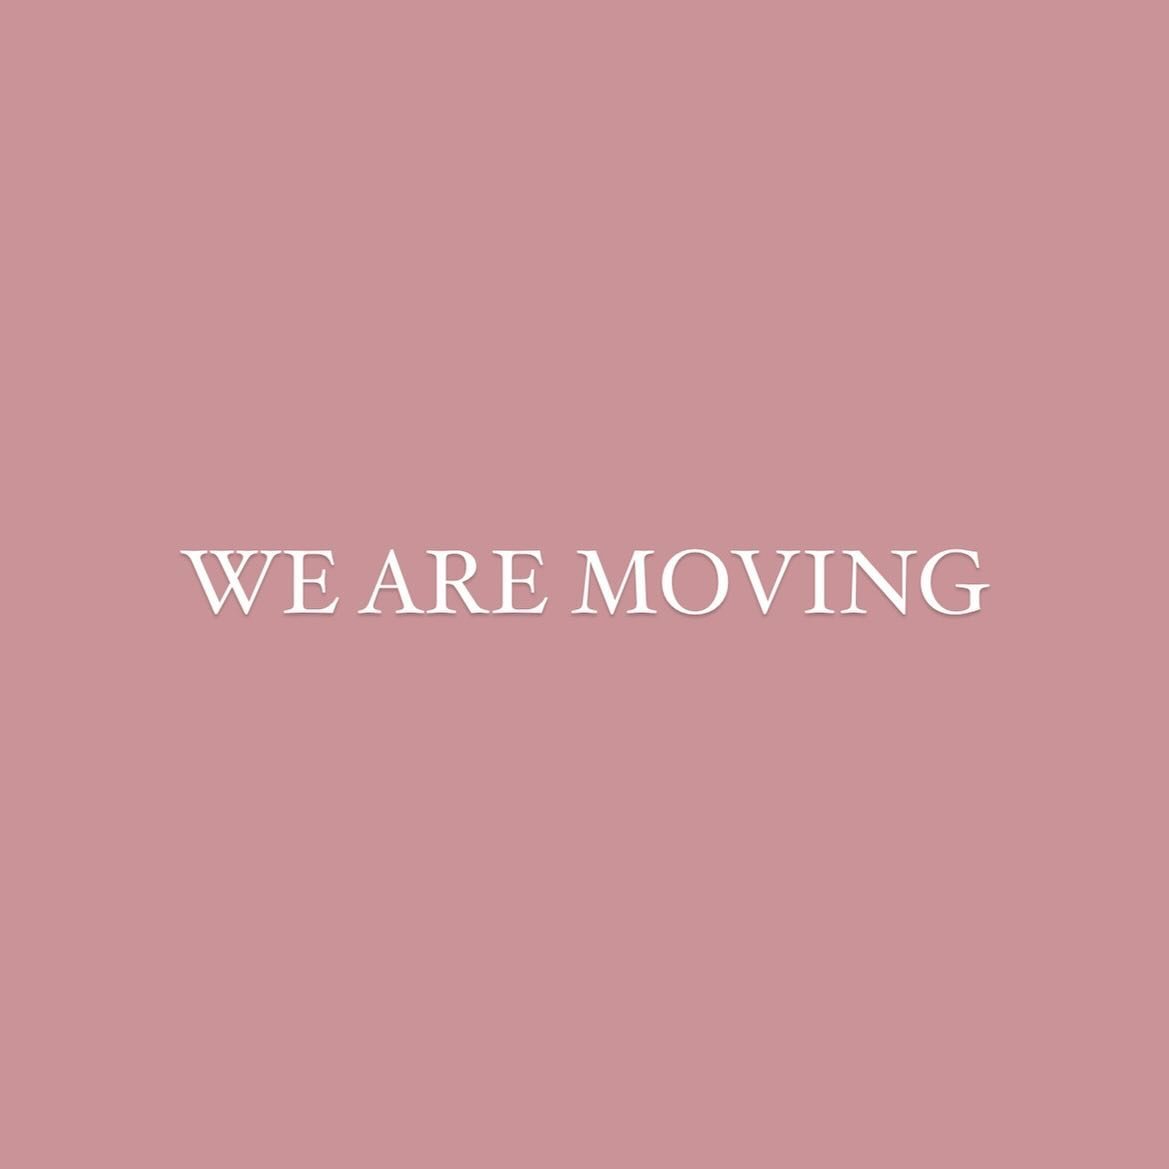 WE ARE MOVING 🏡

We&rsquo;ll be moving to Papakura at the end of May. This means that I&rsquo;ll be taking orders up till the 25th for pick up in Pakuranga and then for the 8th of June onwards for pick up in Papakura. 

If you&rsquo;ve enquired and 